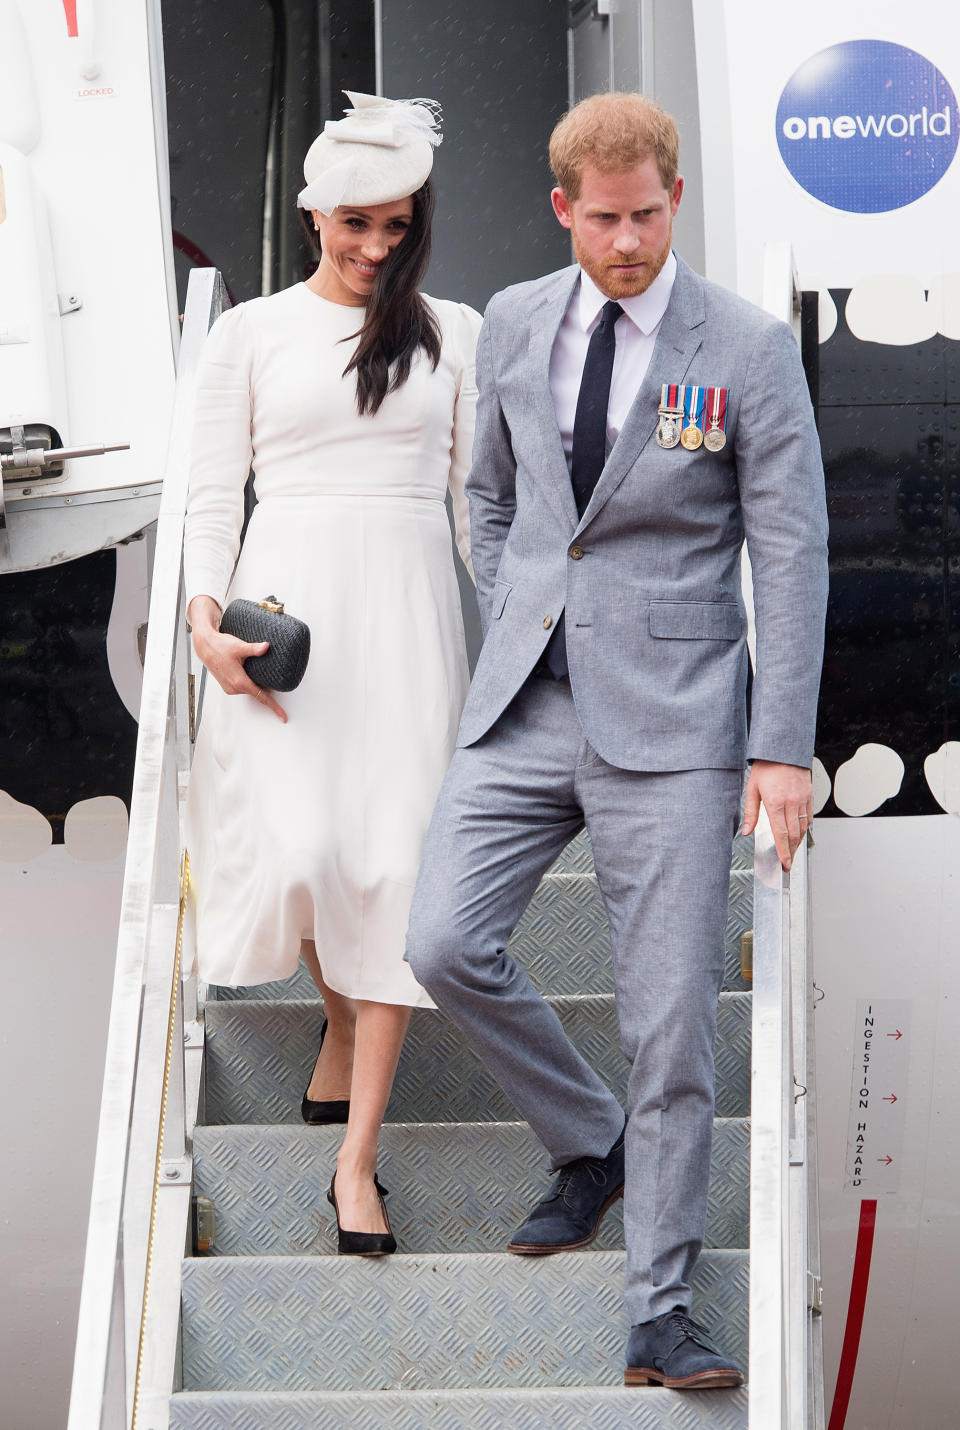 <p>Arriving at Nausori Airport, the Duchess of Sussex looked smart in a custom, white dress by Aussie label <a rel="nofollow noopener" href="https://www.net-a-porter.com/gb/en/Shop/Designers/Zimmermann?pn=1&npp=60&image_view=product&dScroll=0&cm_mmc=LinkshareUK-_-TnL5HPStwNw-_-Custom-_-LinkBuilder&siteID=TnL5HPStwNw-w8Ldm_2zV_tJqN.t0xDP2w&Skimlinks.com=Skimlinks.com&dclid=CNKX8PGnnN4CFRn47QodtToKdA" target="_blank" data-ylk="slk:Zimmerman" class="link ">Zimmerman</a> with a matching hat by Stephen Jones. But it was her jewellery that hit headlines: The Duchess paired earrings from the Queen with a bracelet from Prince Charles. <em>[Photo: Getty]</em> </p>